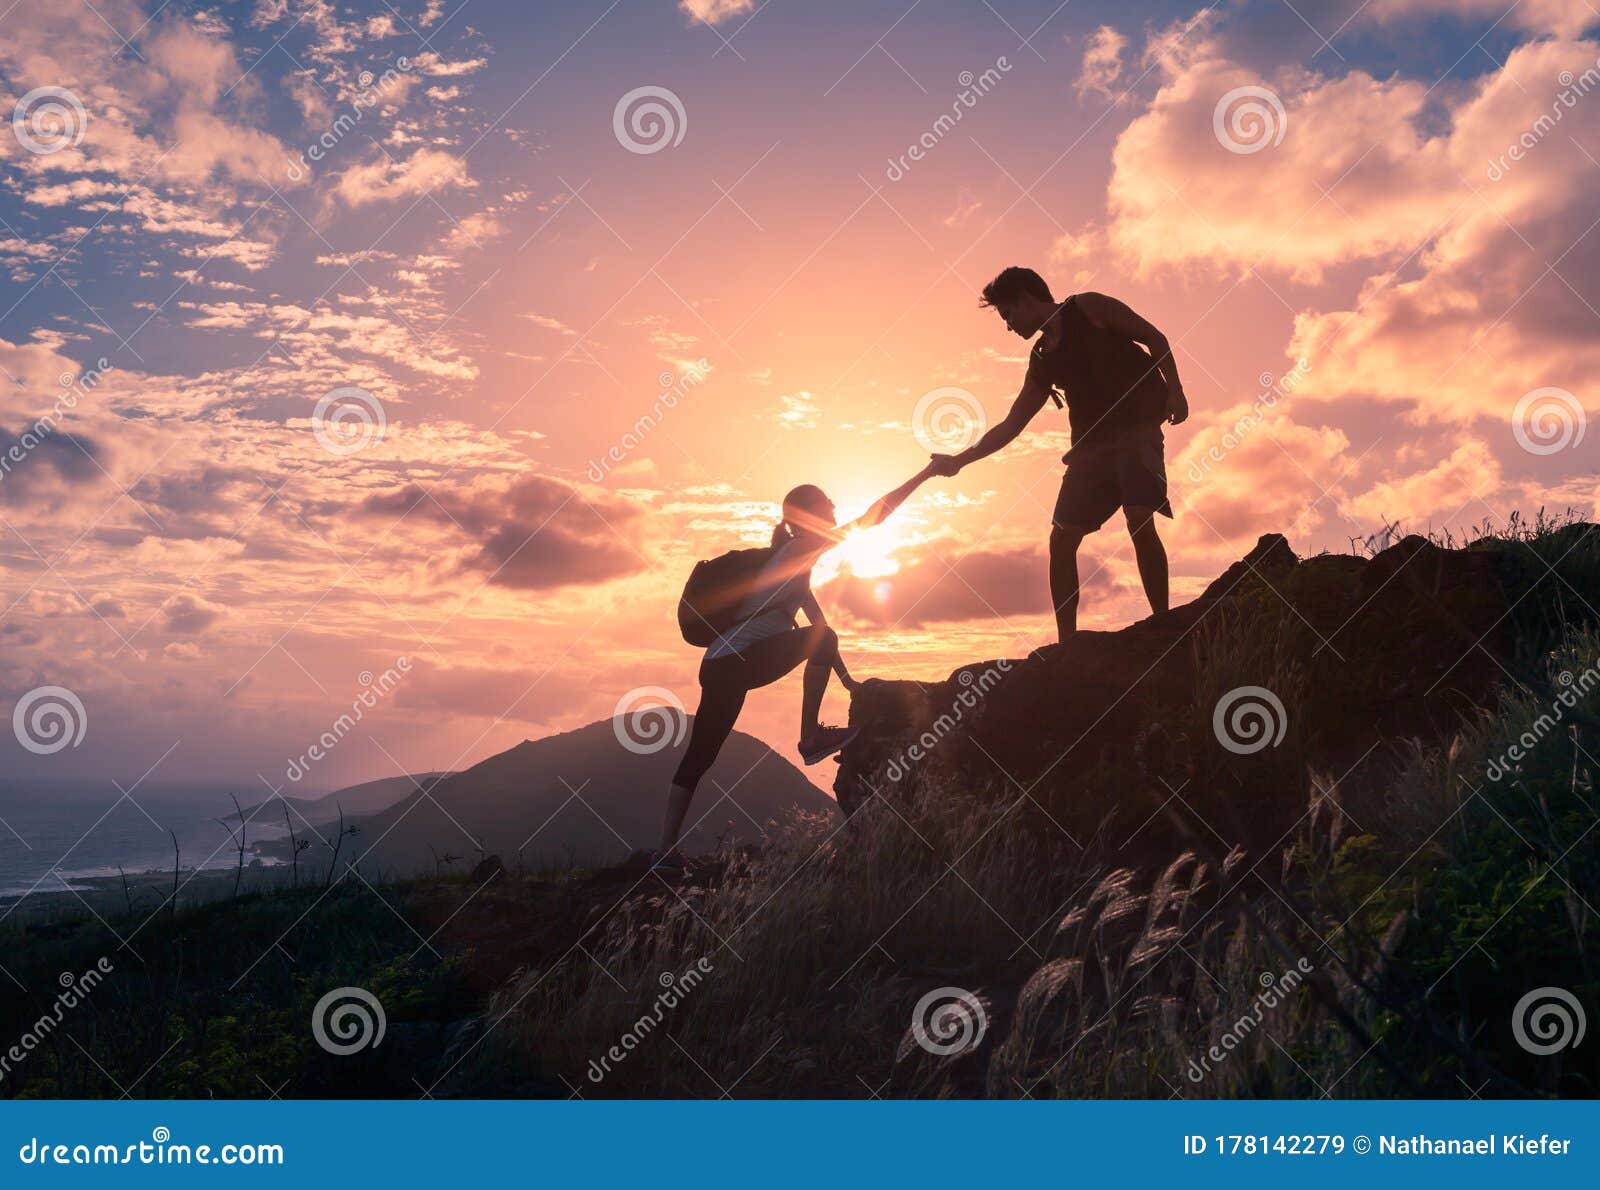 people helping each other hike up a mountain at sunrise. giving a helping hand.